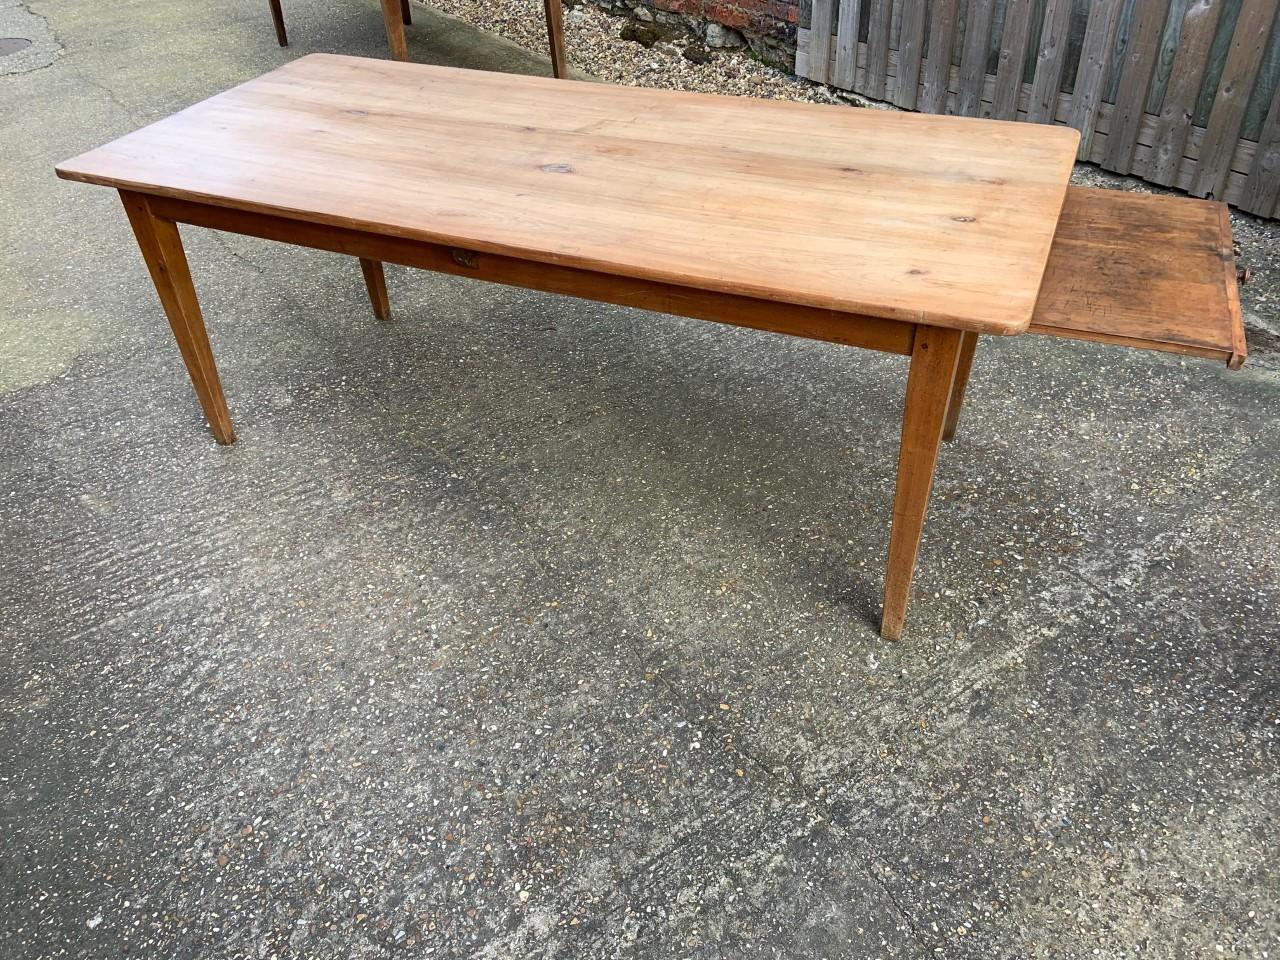 Hand-Crafted 19th Century Pale Rustic Cherry Wide Farmhouse Table